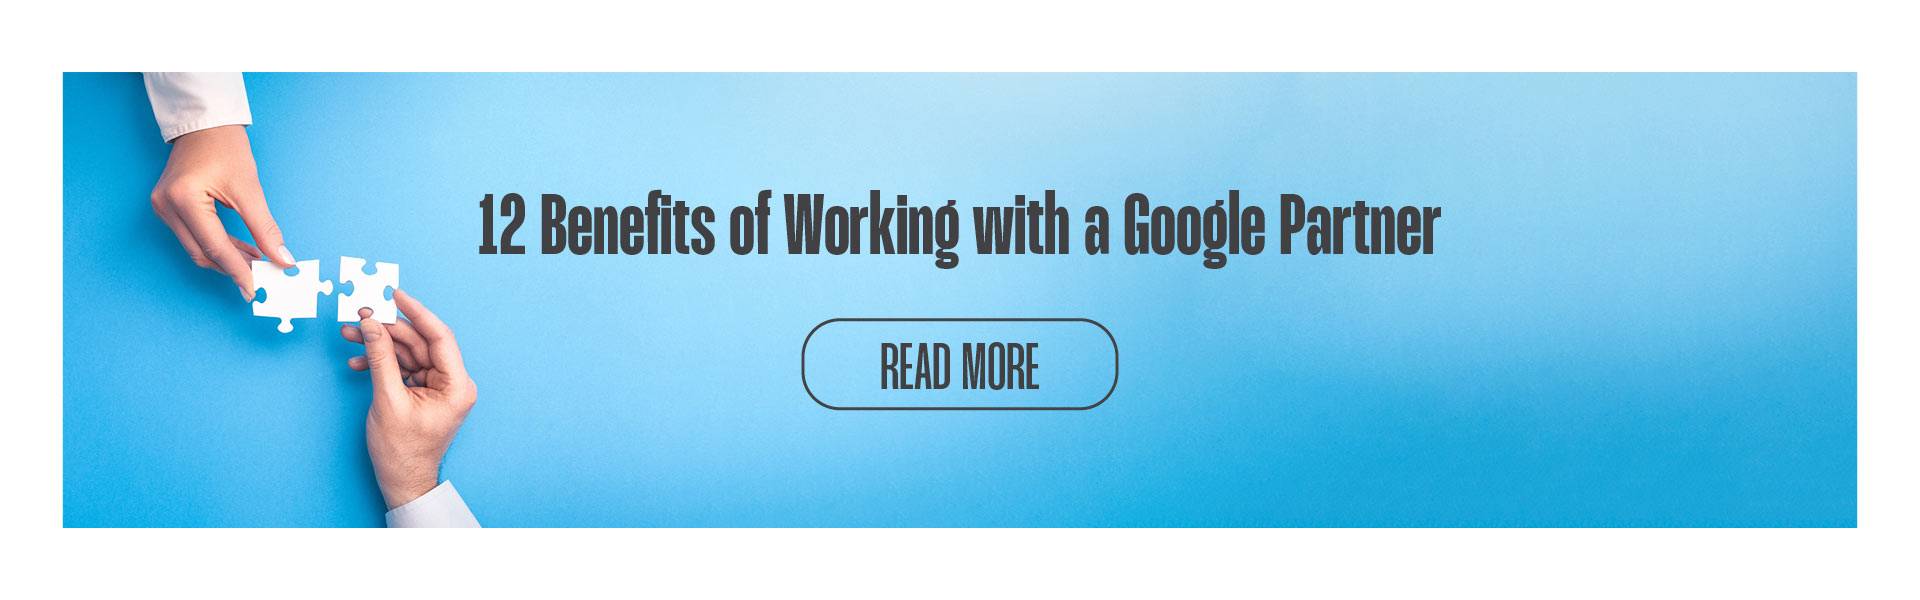 banner-cta-for-12-Benefits-of-working-with-a-google-partner